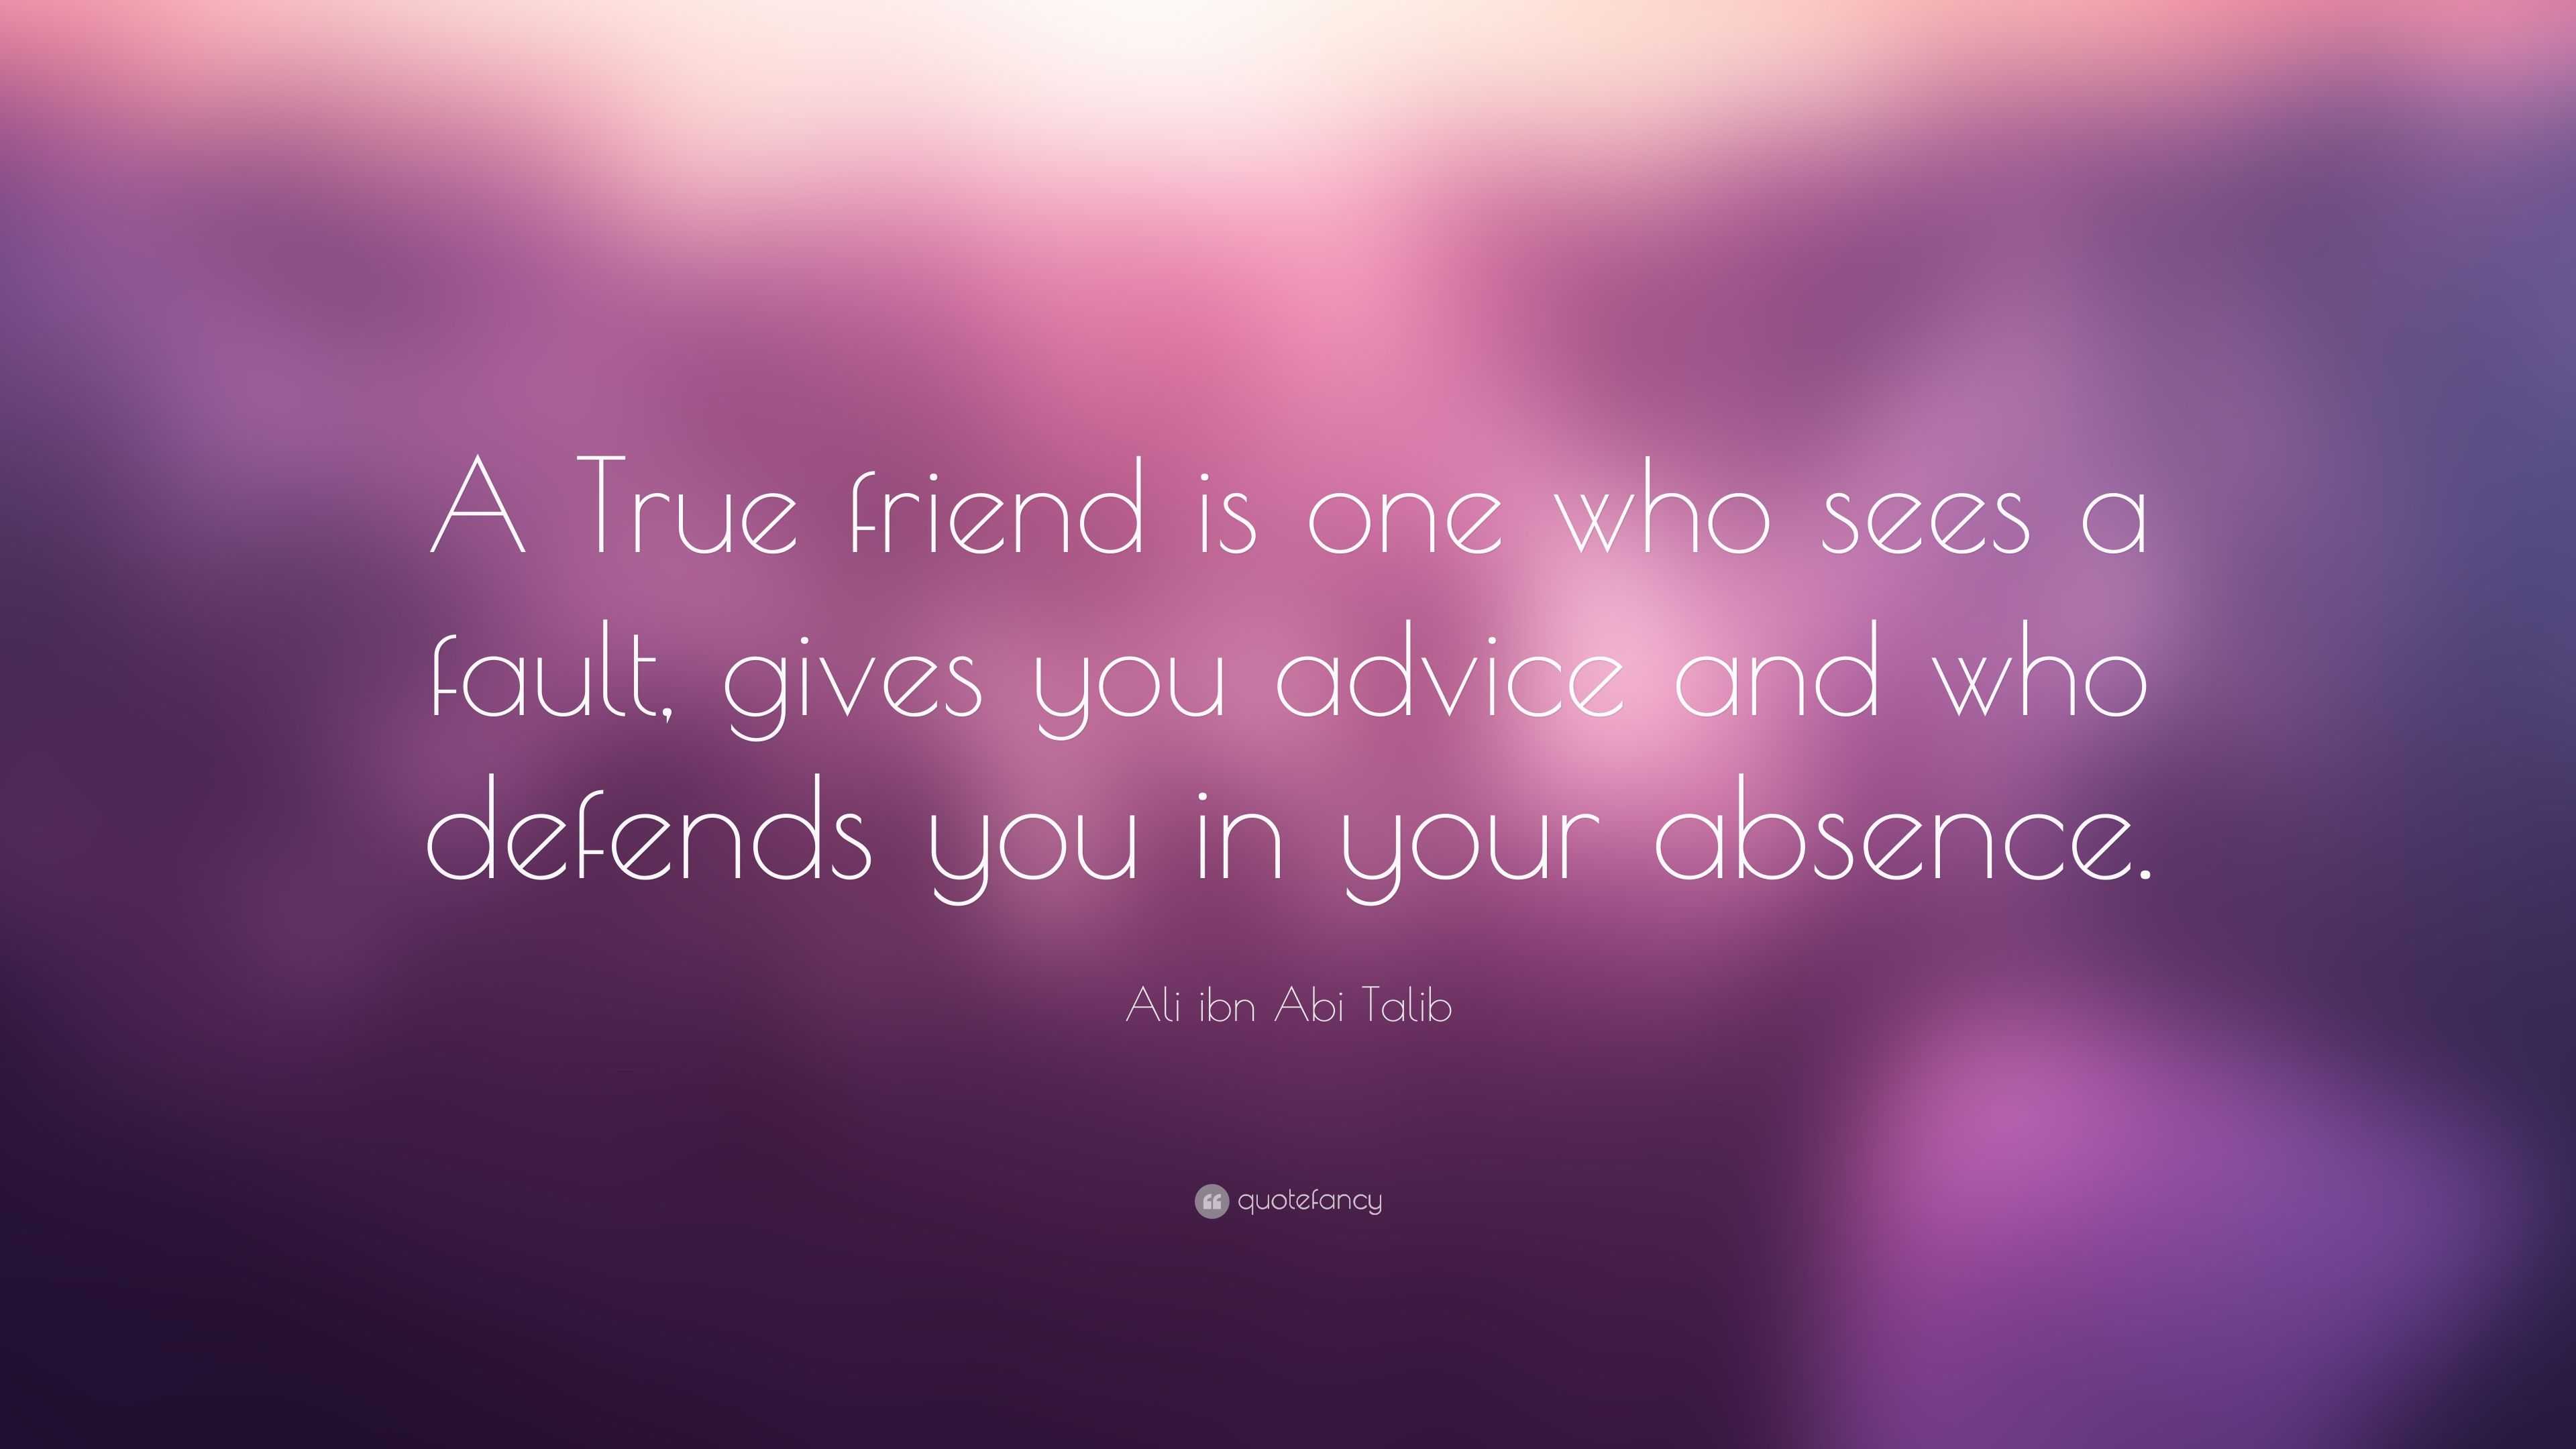 Ali ibn Abi Talib Quote: “A True friend is one who sees a fault, gives ...